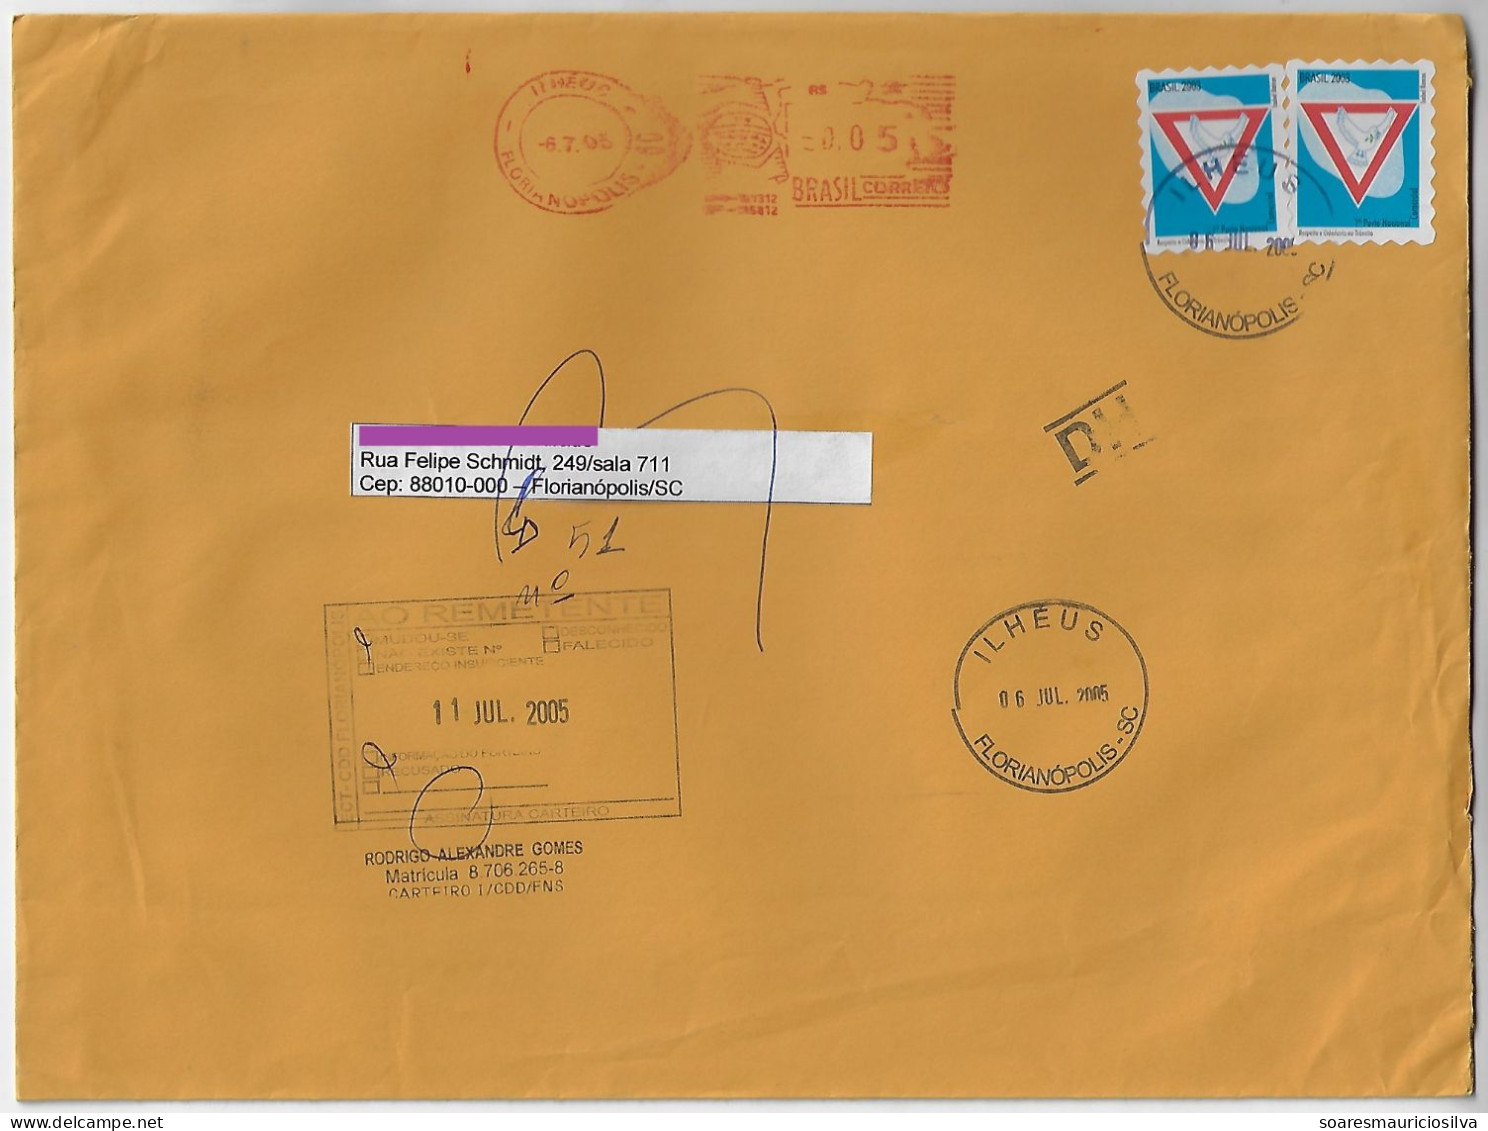 Brazil 2005 Returned Cover Florianópolis Ilhéus Agency 2 Stamp Dove Of Peace Traffic Sign +meter Stamp Cancel After Hour - Covers & Documents